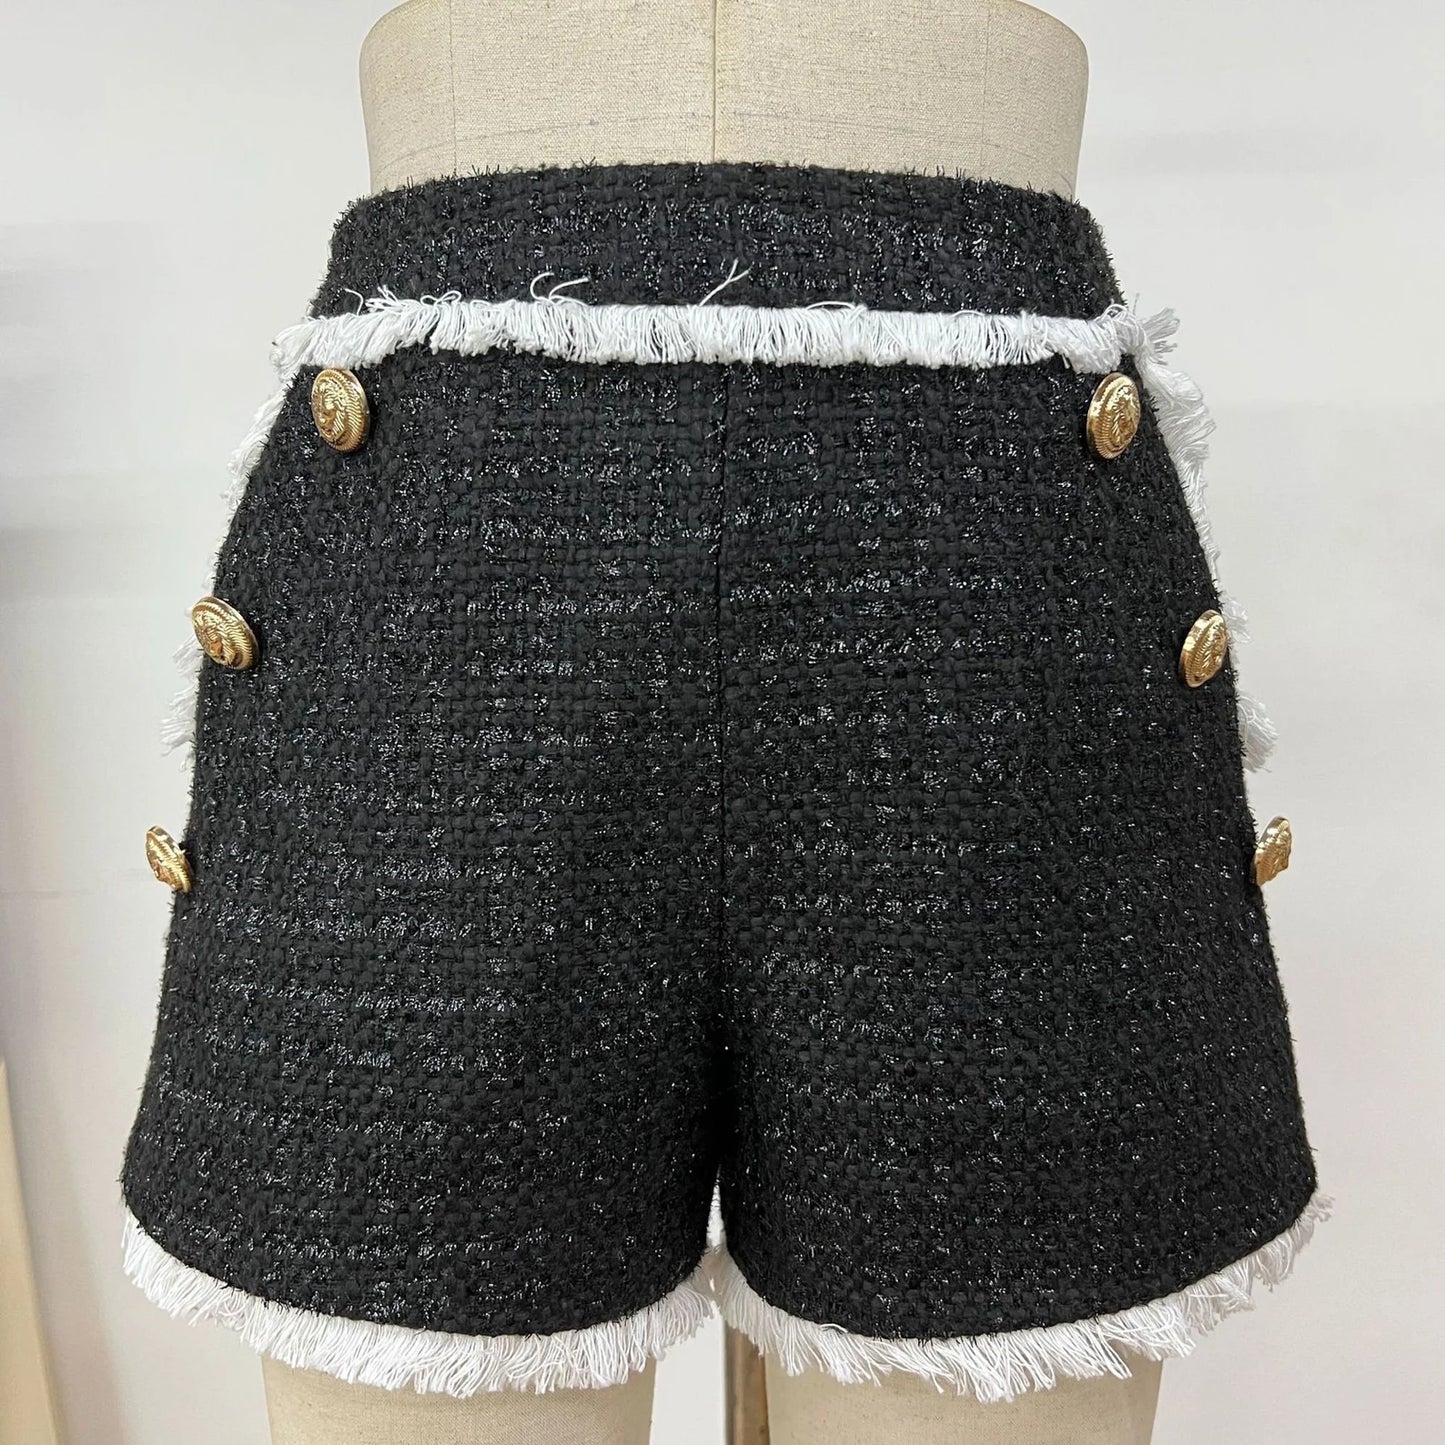 White Threads Tassel Fringe Belted  Tweed  Sparkle Blazer Coat + Shorts Suit Black Piece Set Comfort and unique design Elegant suit is made of high quality fabric that is soft, comfortable, and long-lasting. Tweed   Girls. Checks are popular right now. You'll adore this pink pleated skirt. Dress cute in our girls' skirts.